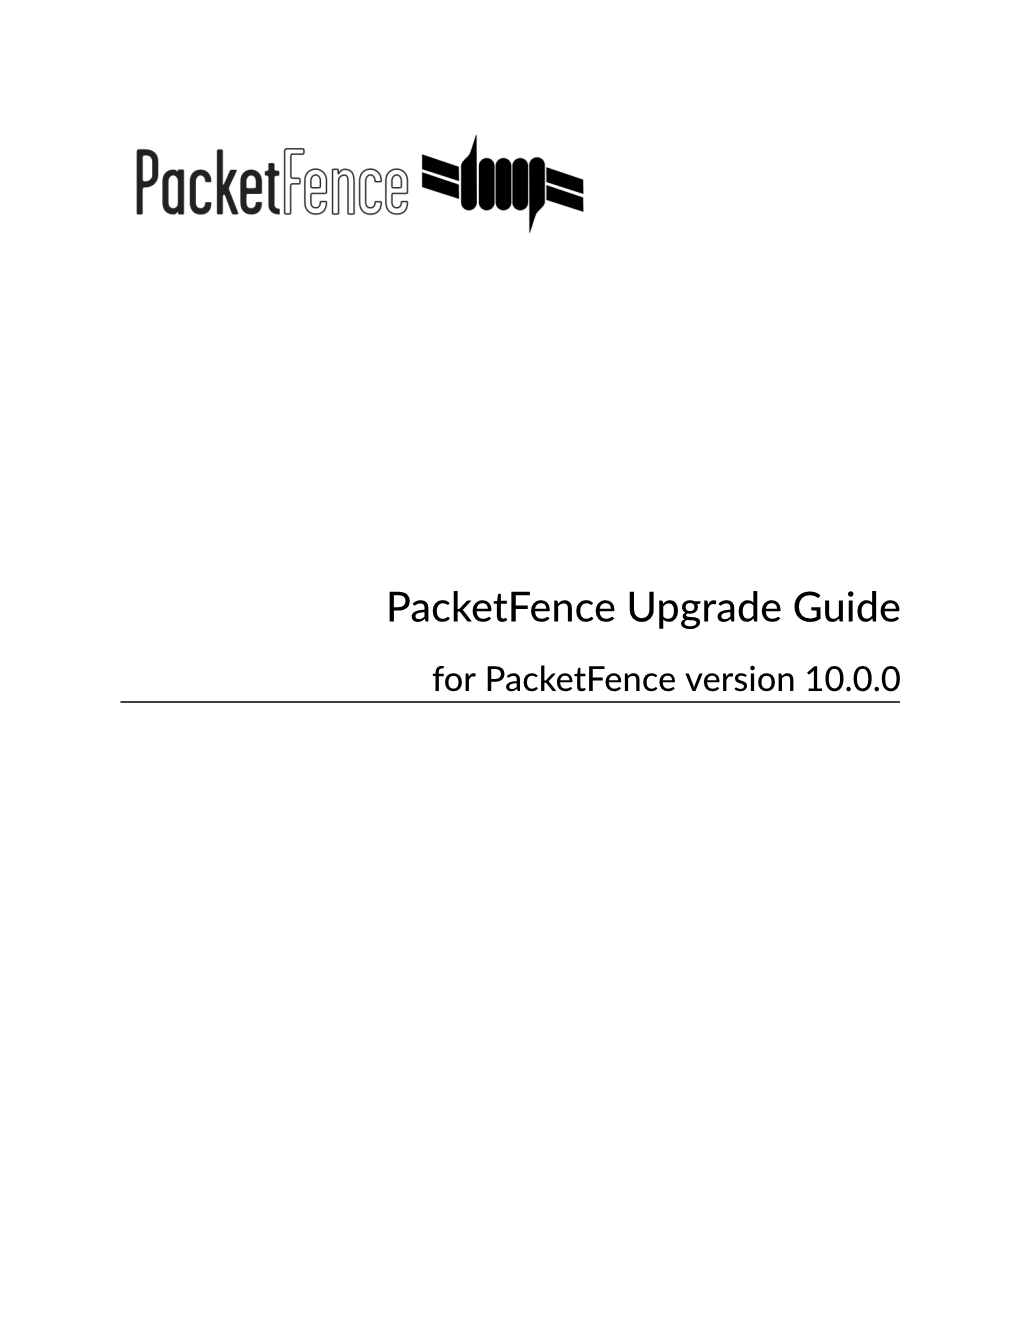 Packetfence Upgrade Guide for Packetfence Version 10.0.0 Packetfence Upgrade Guide Version 10.0.0 - April 2020 Copyright © 2020 Inverse Inc